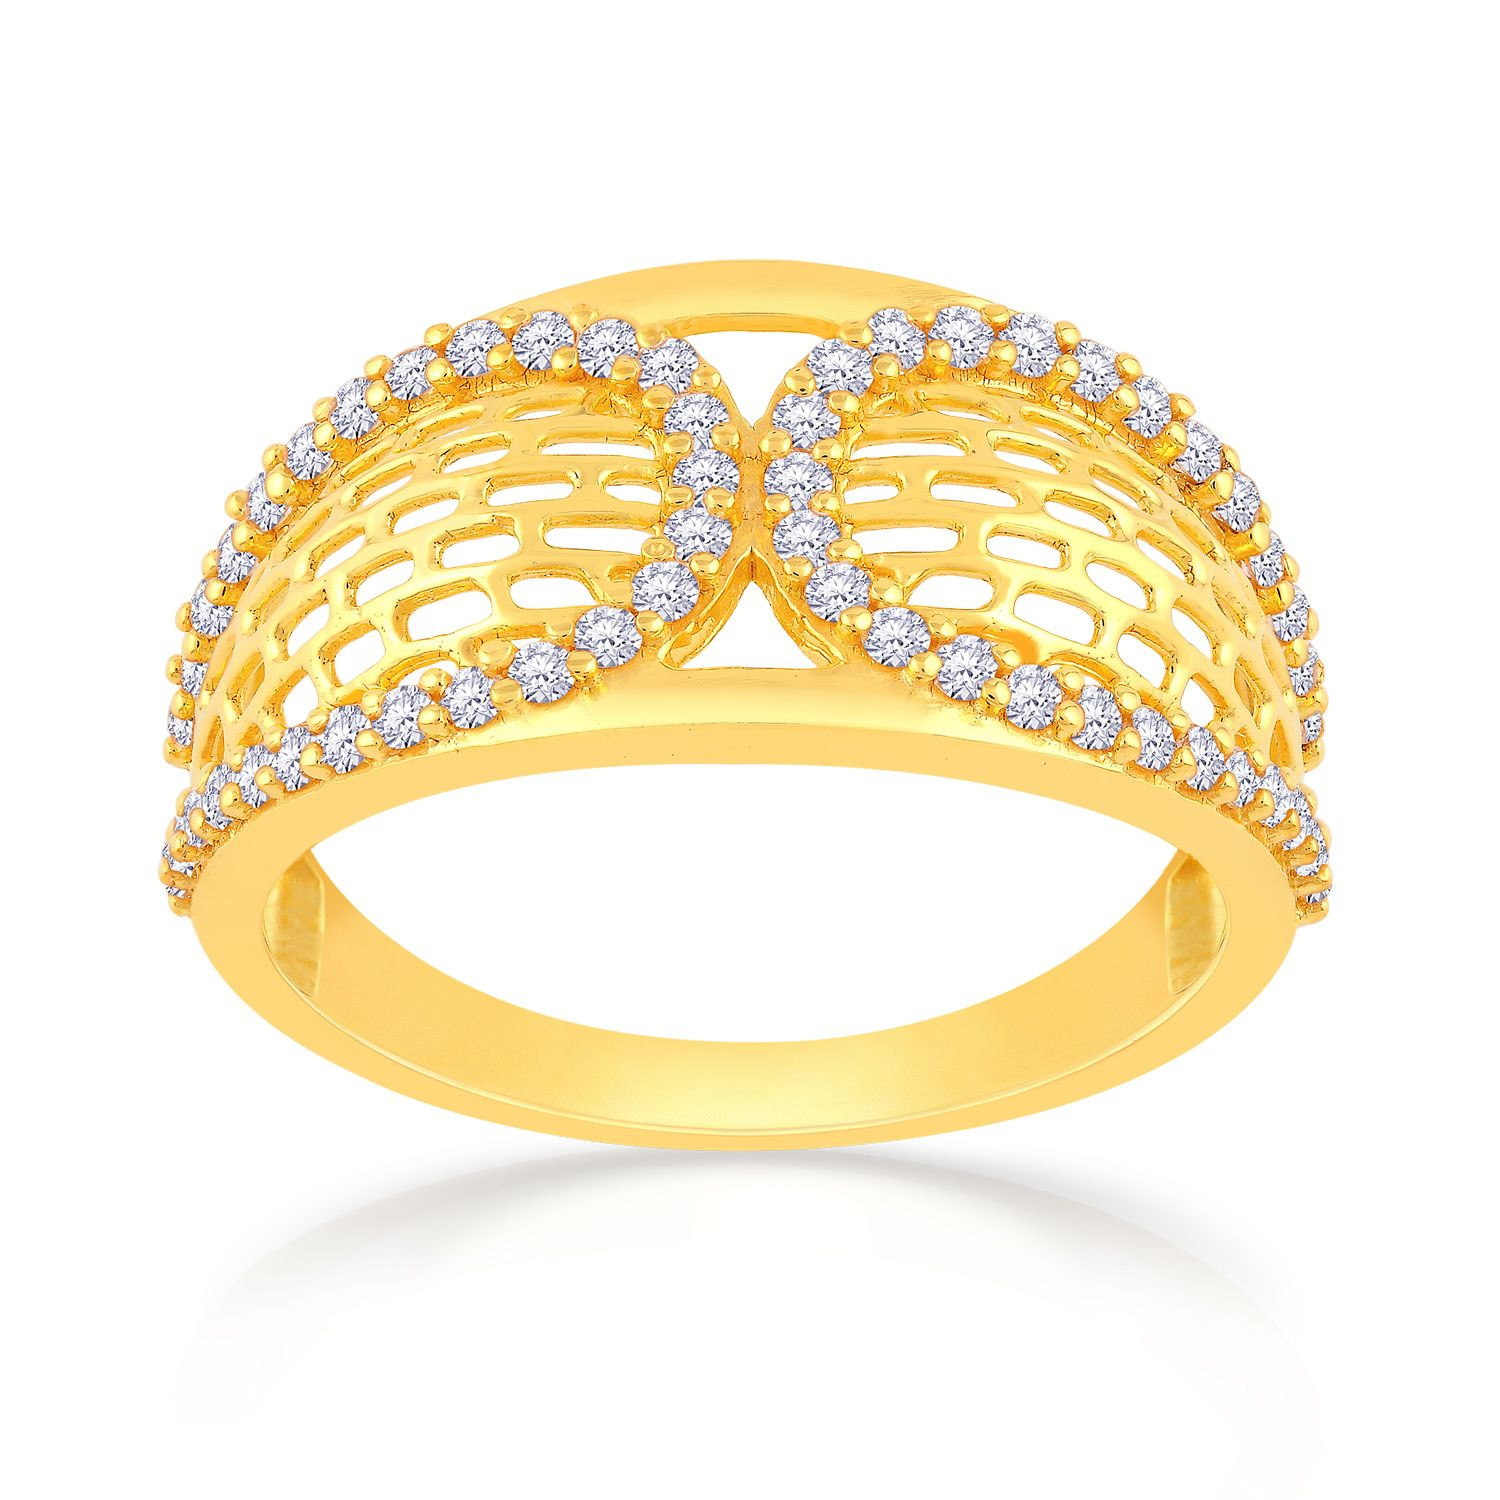 Buy Malabar Gold and Diamonds 22 KT (916) purity Yellow Gold Malabar Gold  Ring RGSKLR10286_Y_10 for Women at Amazon.in